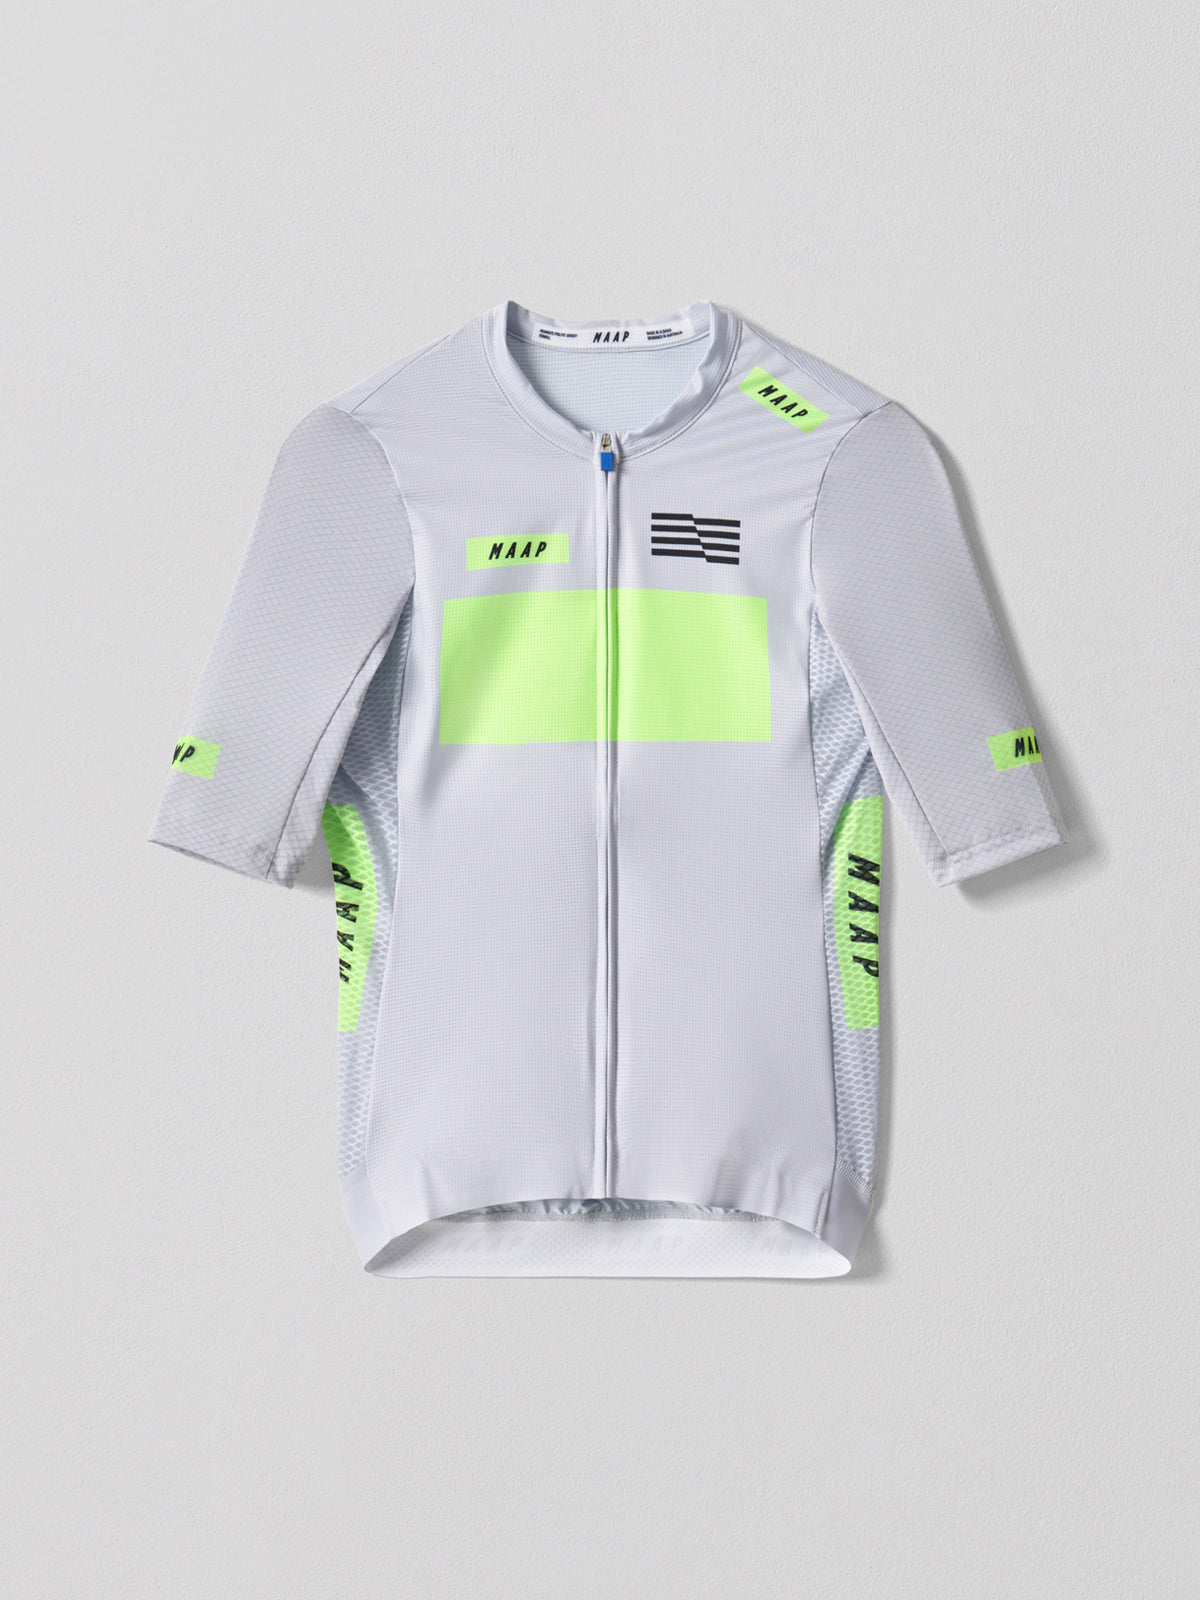 Women's System Pro Air Jersey - MAAP Cycling Apparel